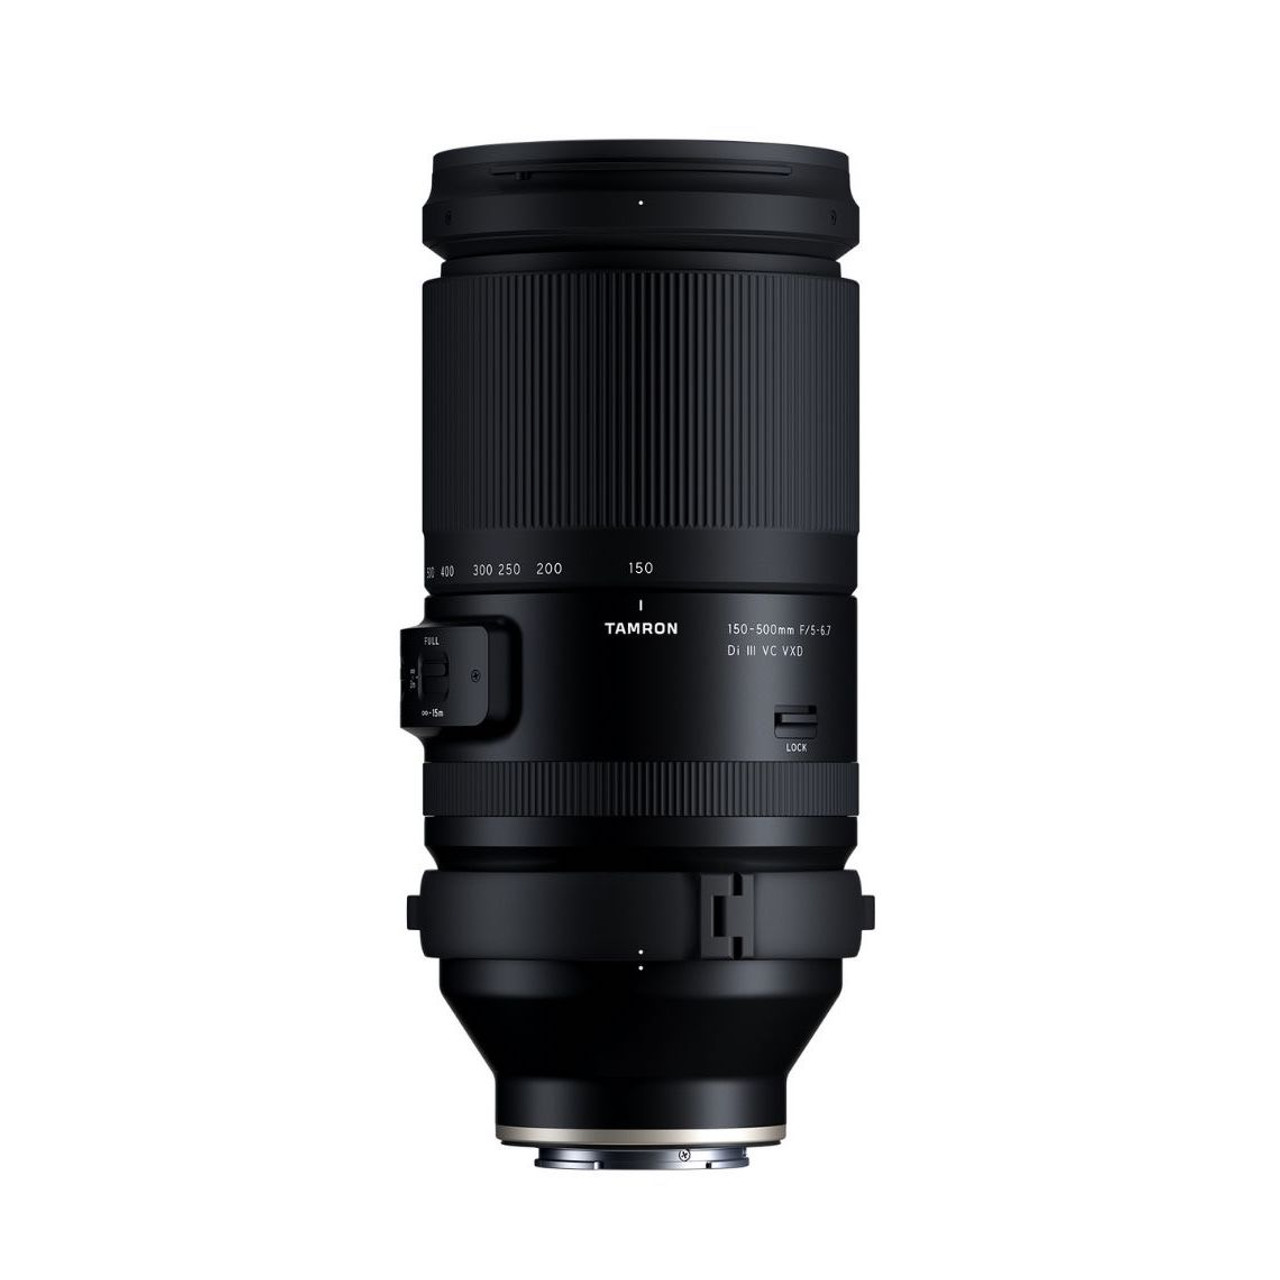 TAMRON 150-500mm F5-6.7 DiIII VC ソニーE用-